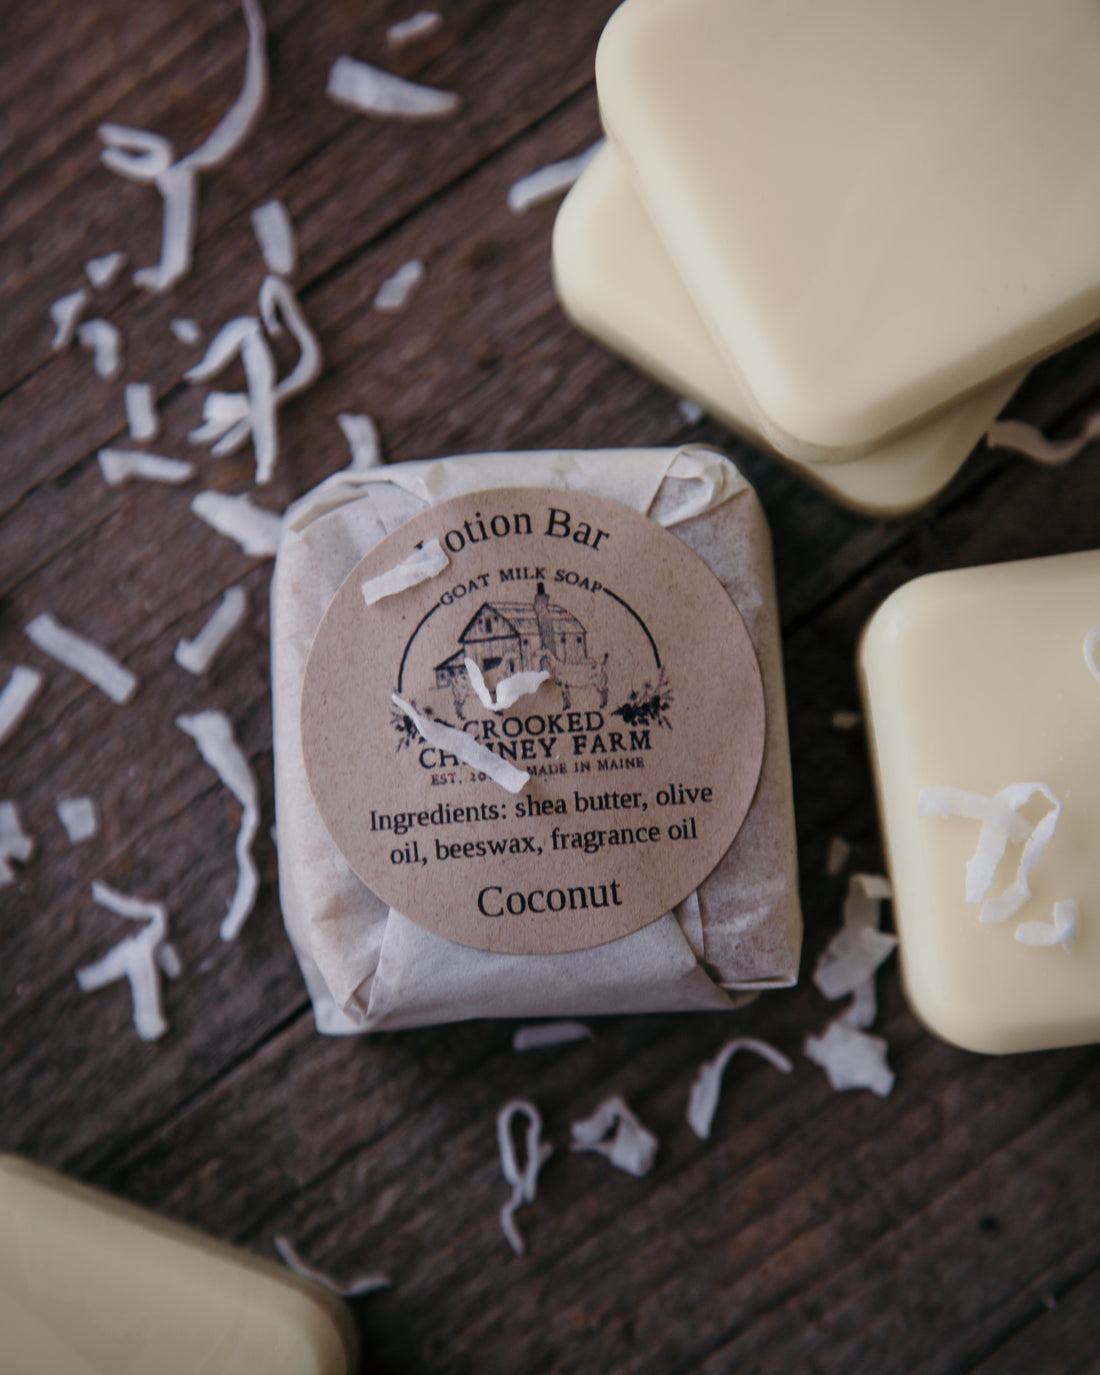 crooked chimney farm coconut lotion bar wrapped in tissue paper with ingredient label.